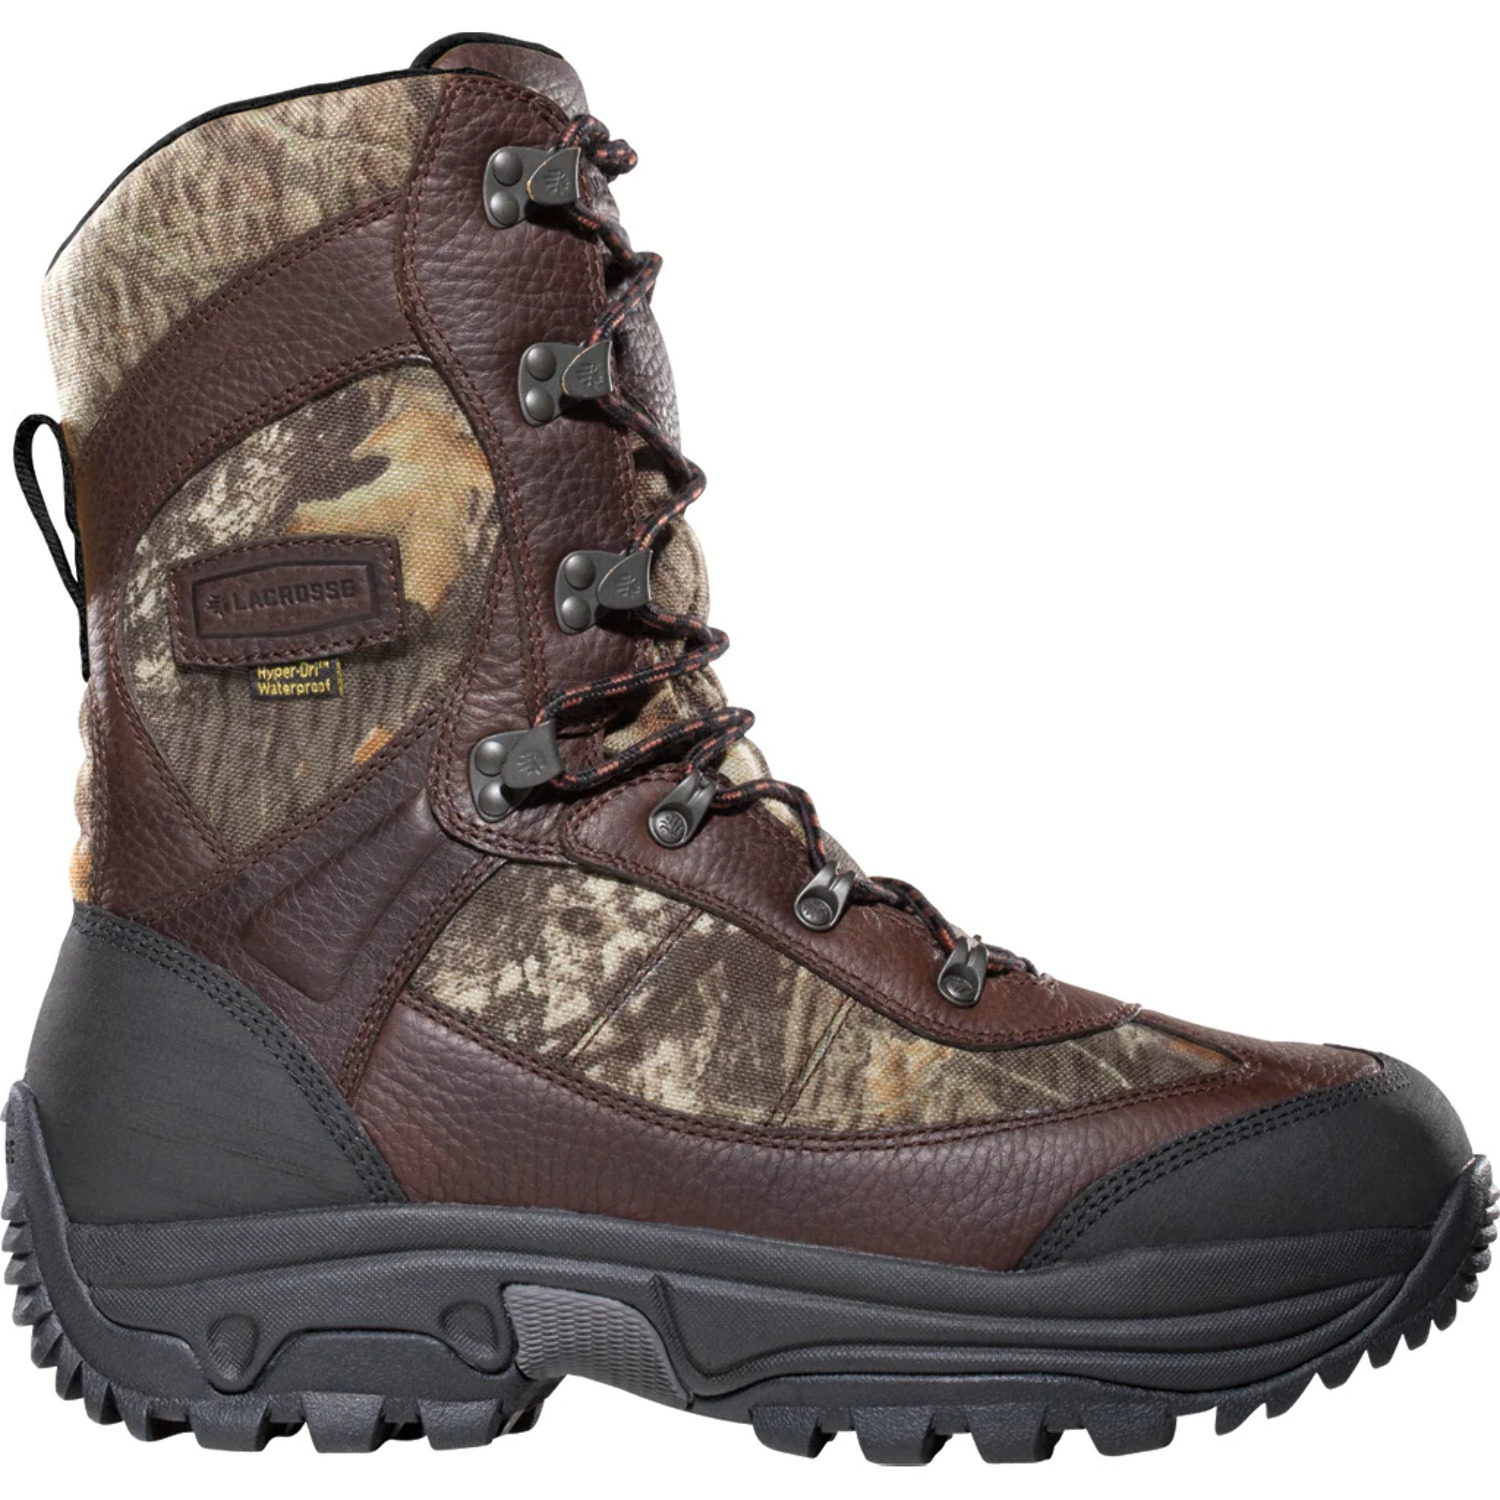 Lacrosse Hunt Pac Extreme Boots - image 1 of 6